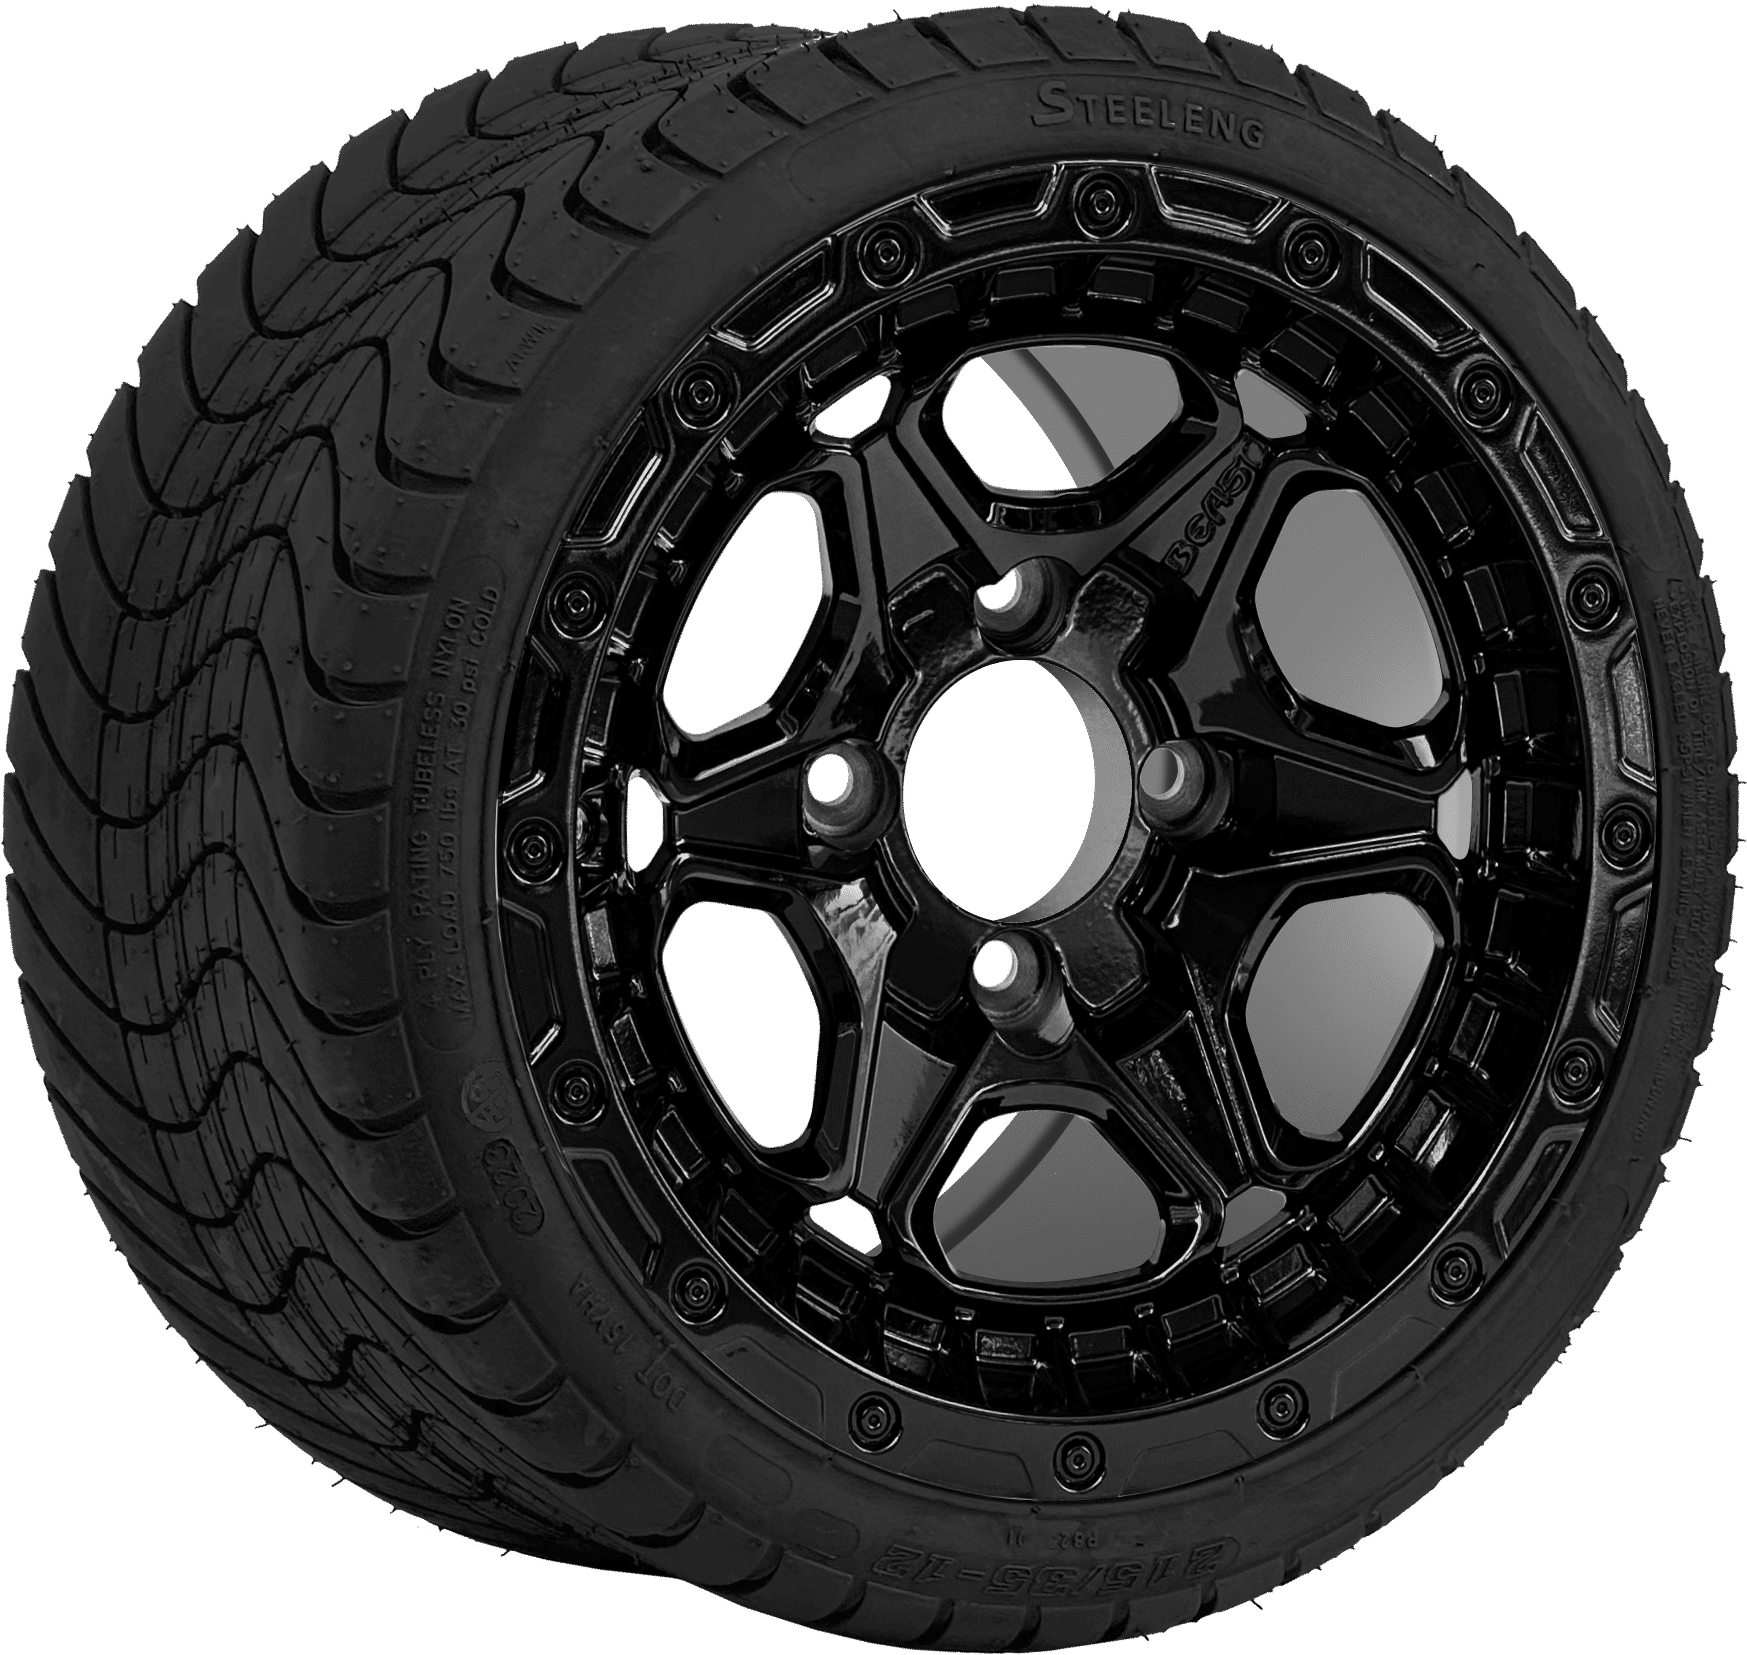 BNDL-TR1212-WH1264-CC0027-LN0005 12″ GRIZZLY GLOSSY BLACK WHEEL – ALUMINUM ALLOY / STEELENG 215/35-12 LOW PROFILE TIRE